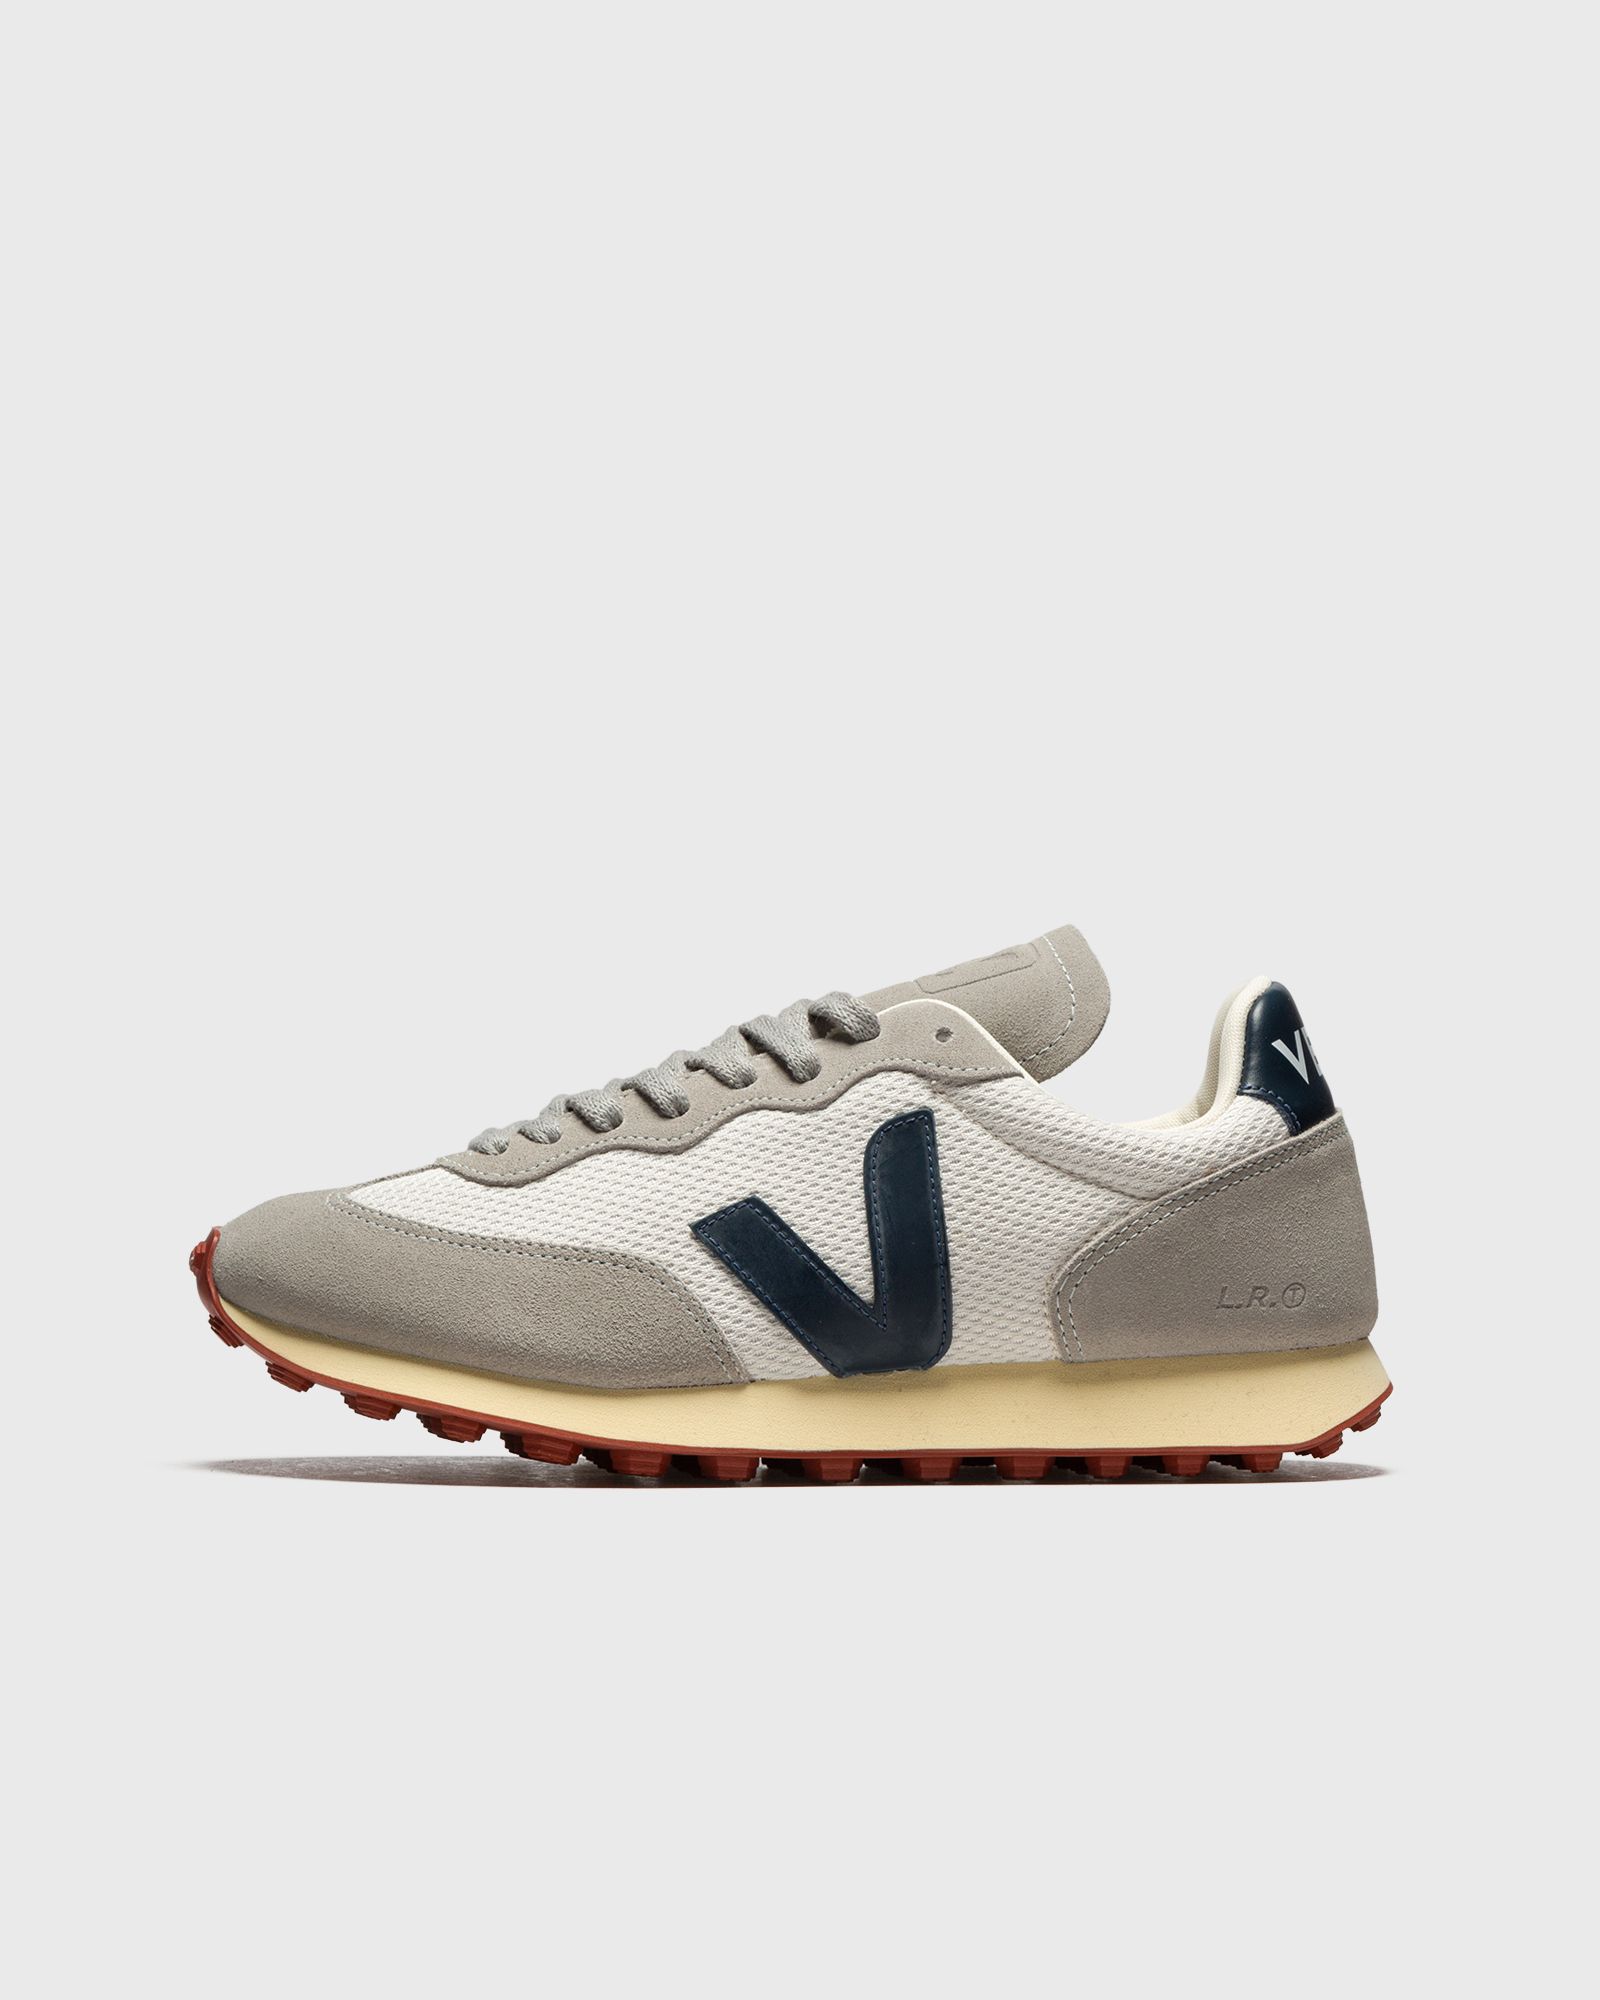 BSTN - US for Veja WMNS RIO BRANCO ALVEOMESH women Sneakers now available at BSTN in size US 8,0 | AccuWeather Shop